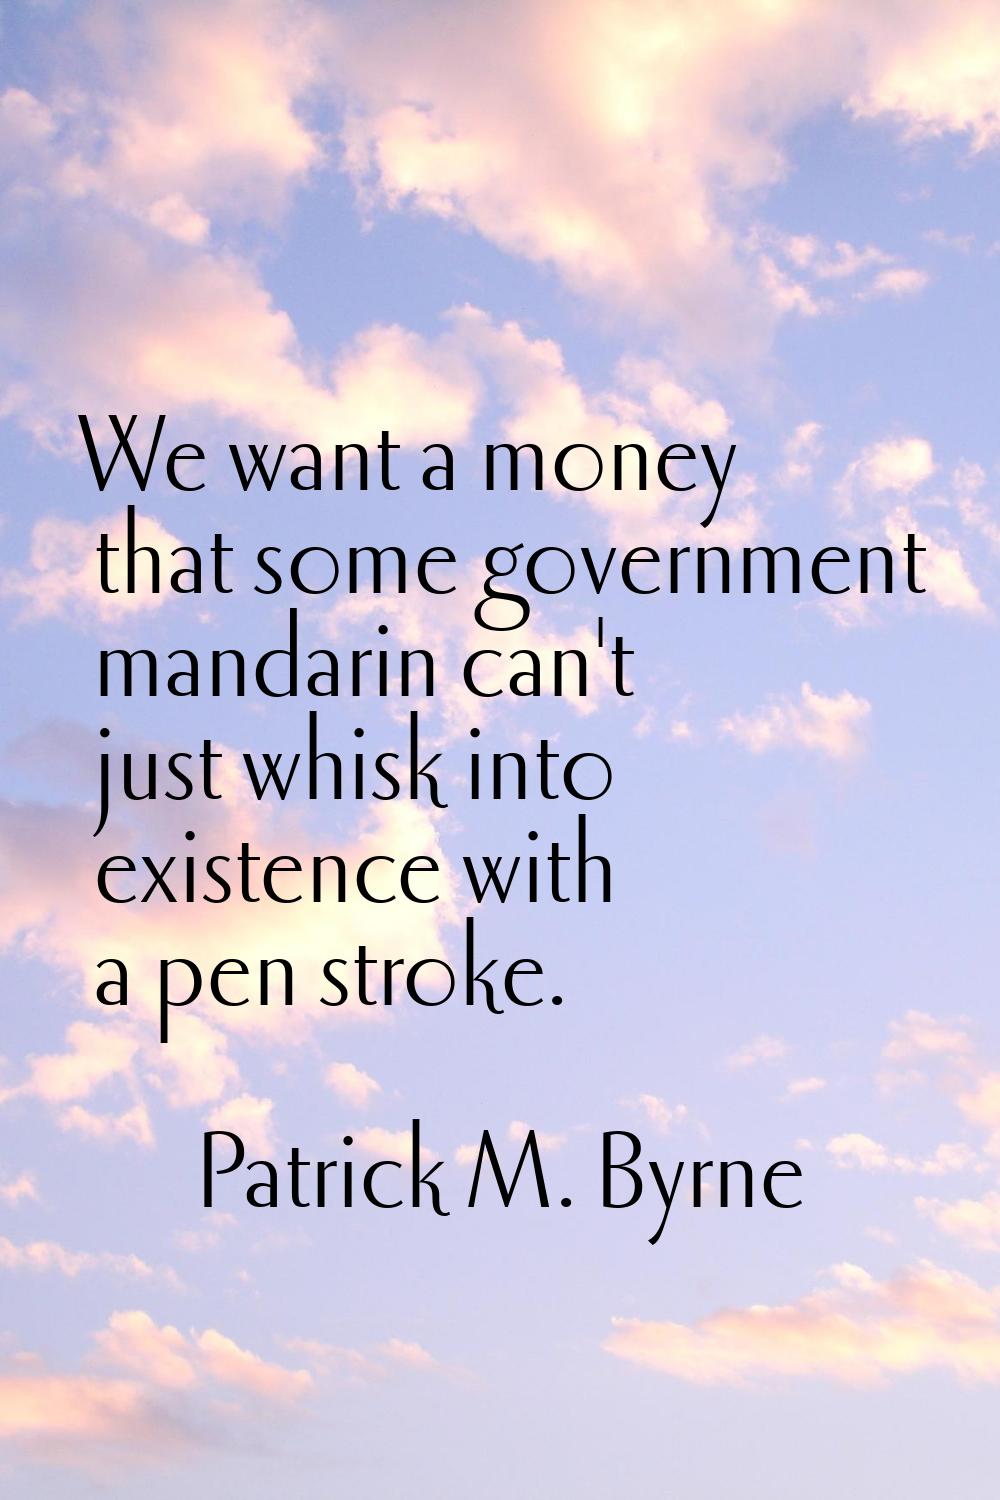 We want a money that some government mandarin can't just whisk into existence with a pen stroke.